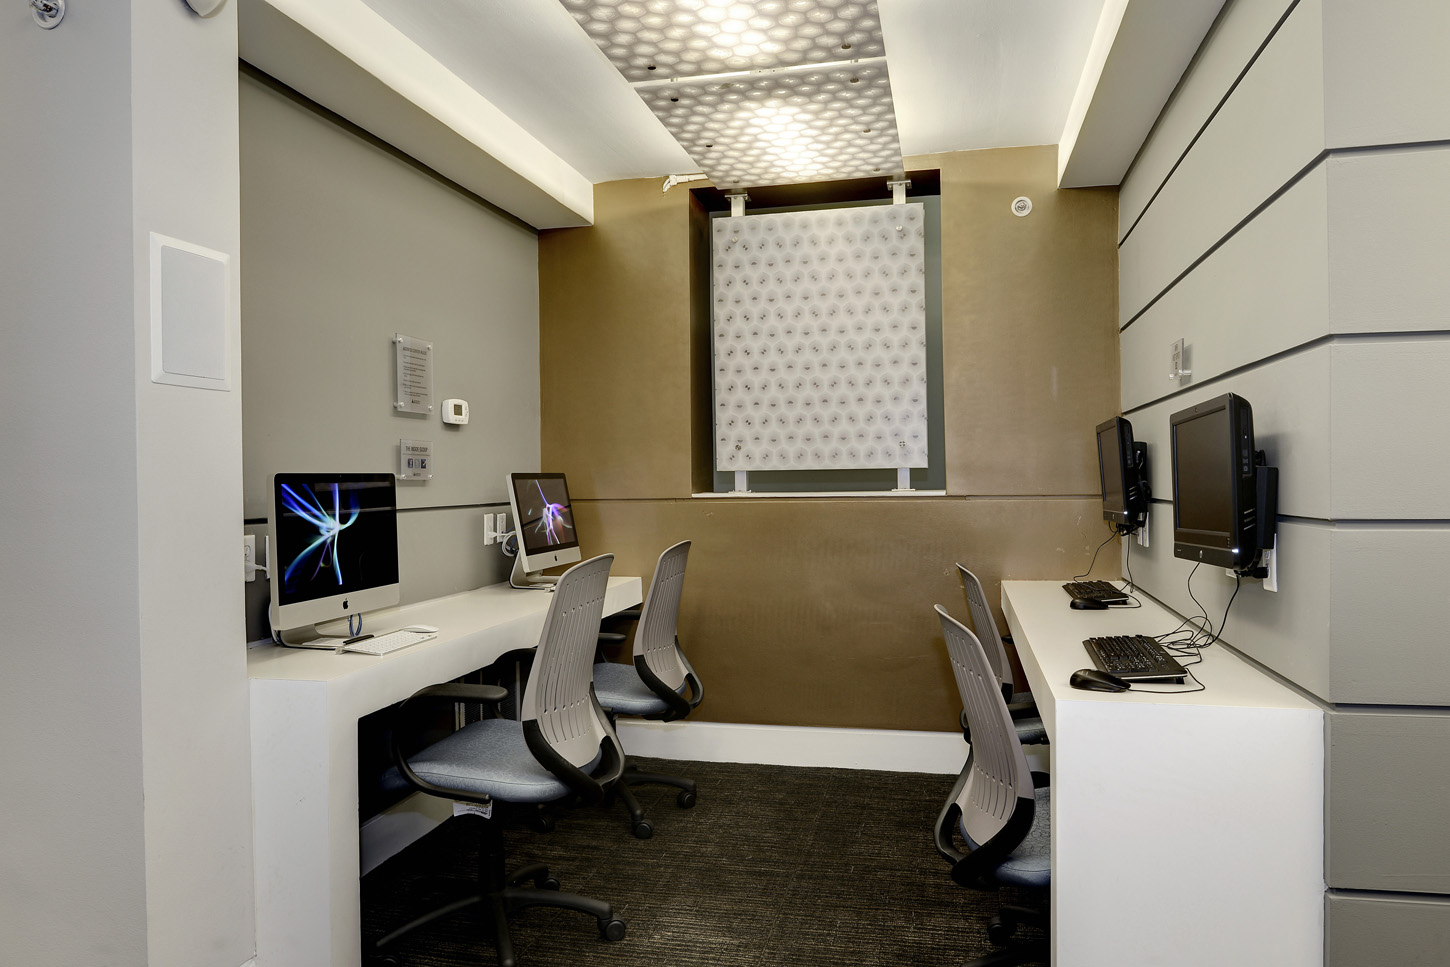 Clubroom nook with iMac and PC computer stations